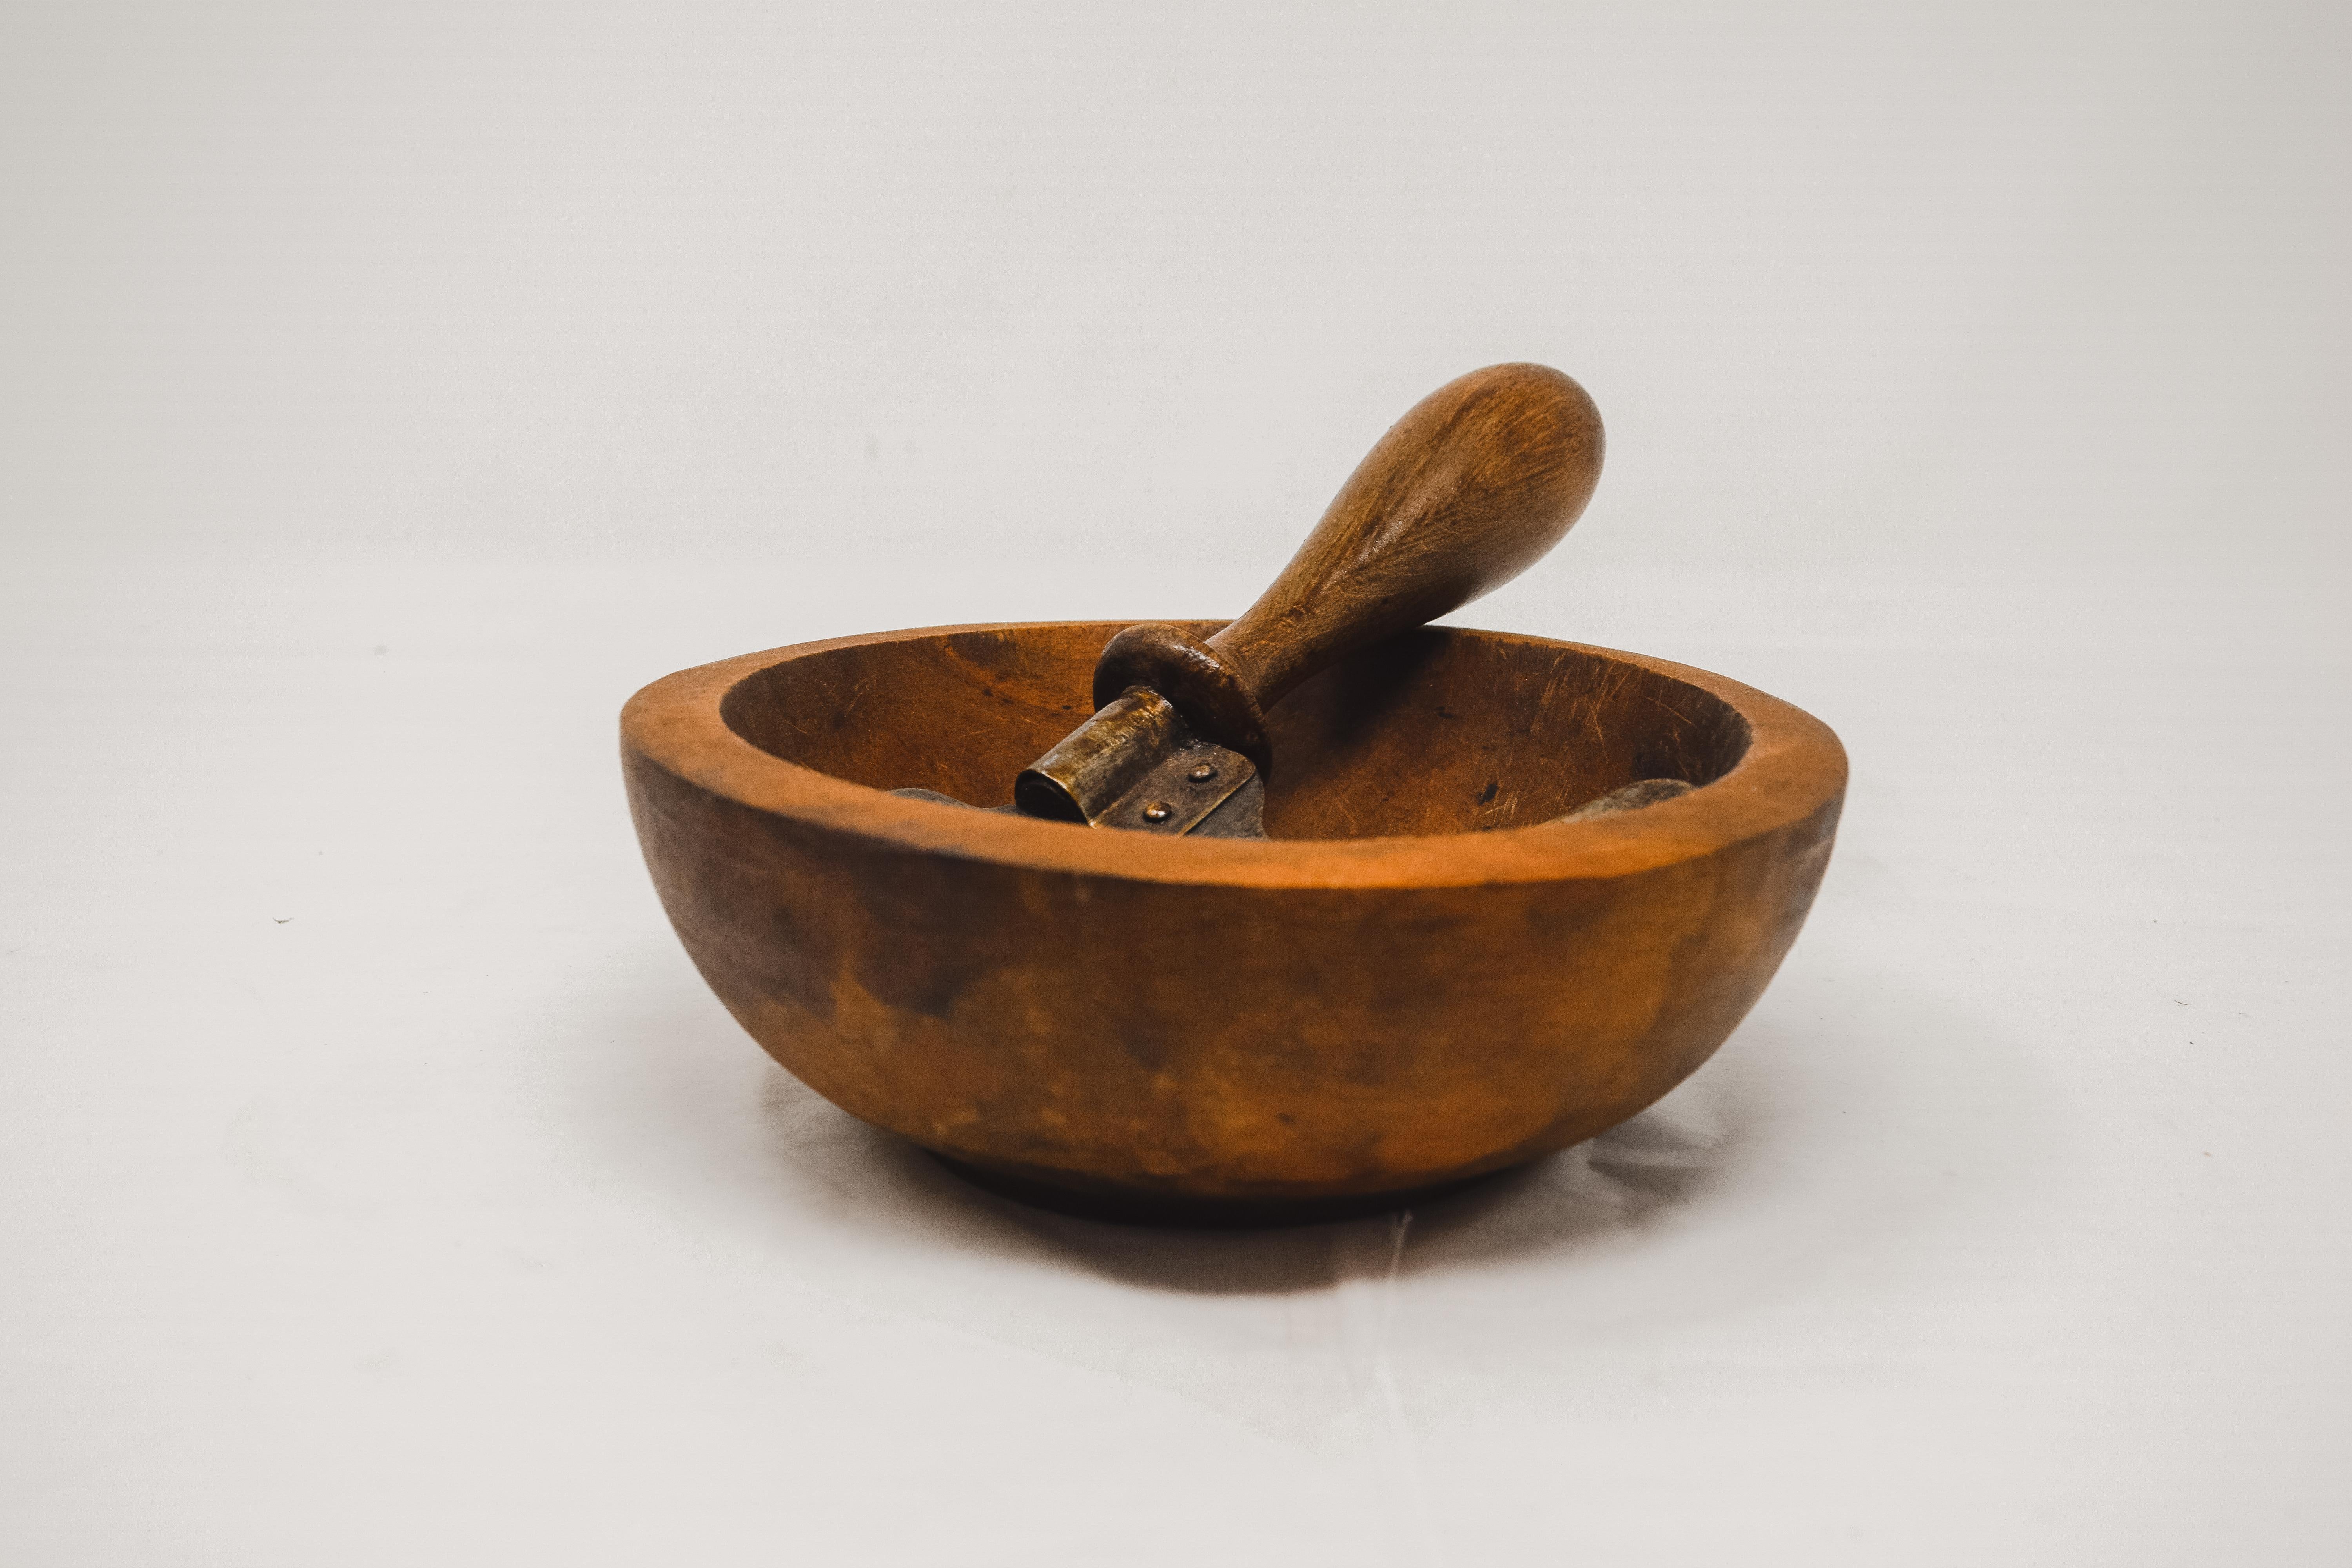 Herb cutter and olive wood bowl from France. The chopper each has an upright wooden handle attached to a crescent shaped steel blade with a wraparound riveted metal strip. The lathe turned bowls have no splits or cracks. The blade has an aged patina